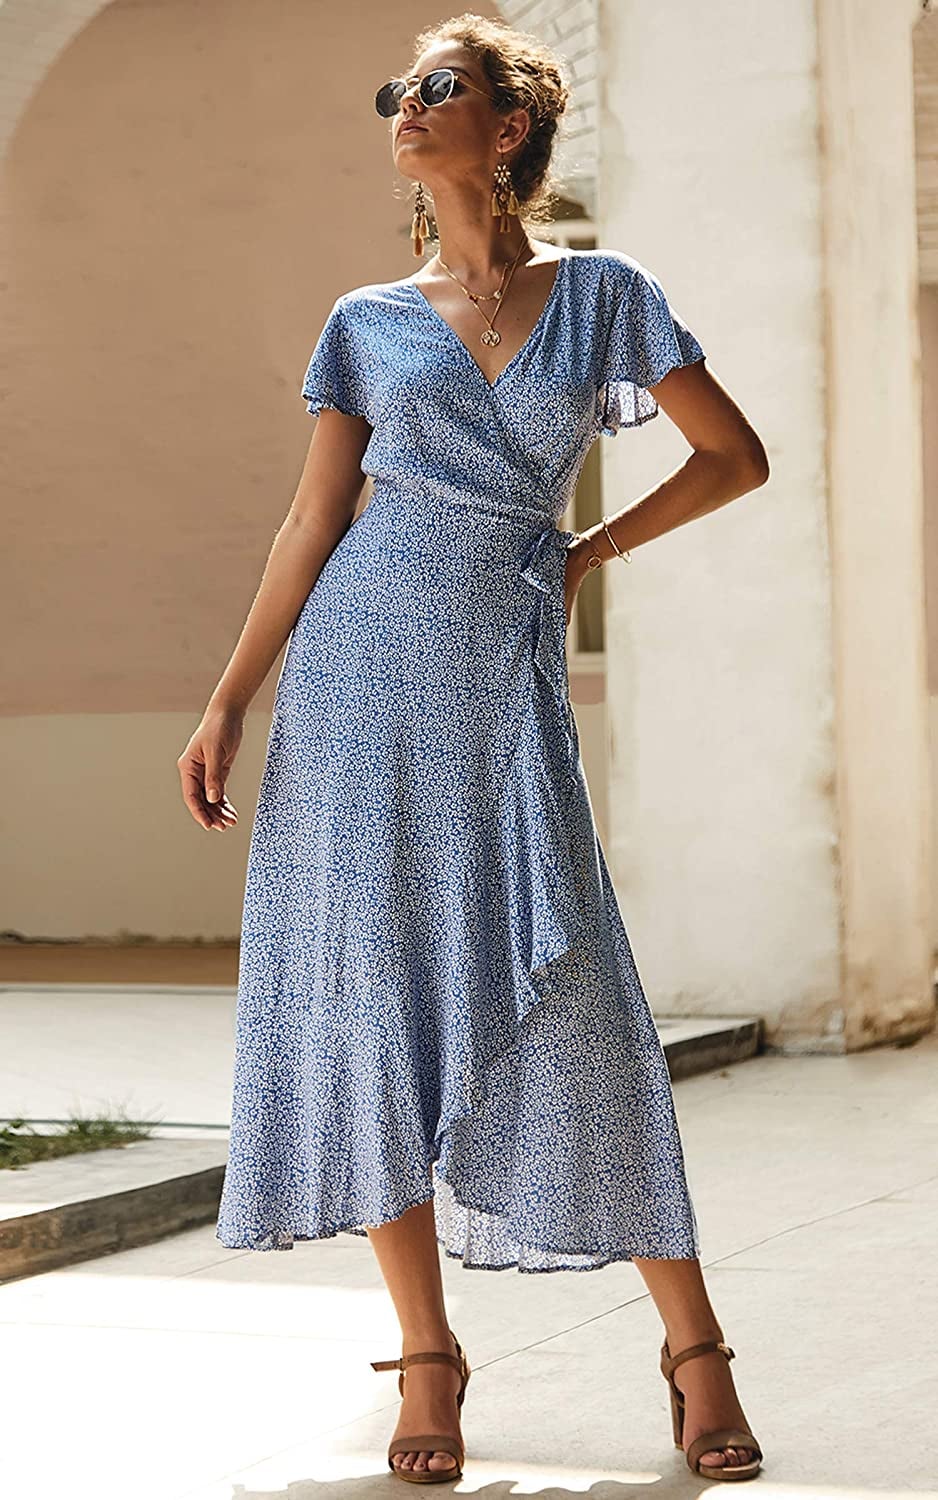 Top Cotton Dresses for Summer : Stay Cool and Stylish – The Loom Blog